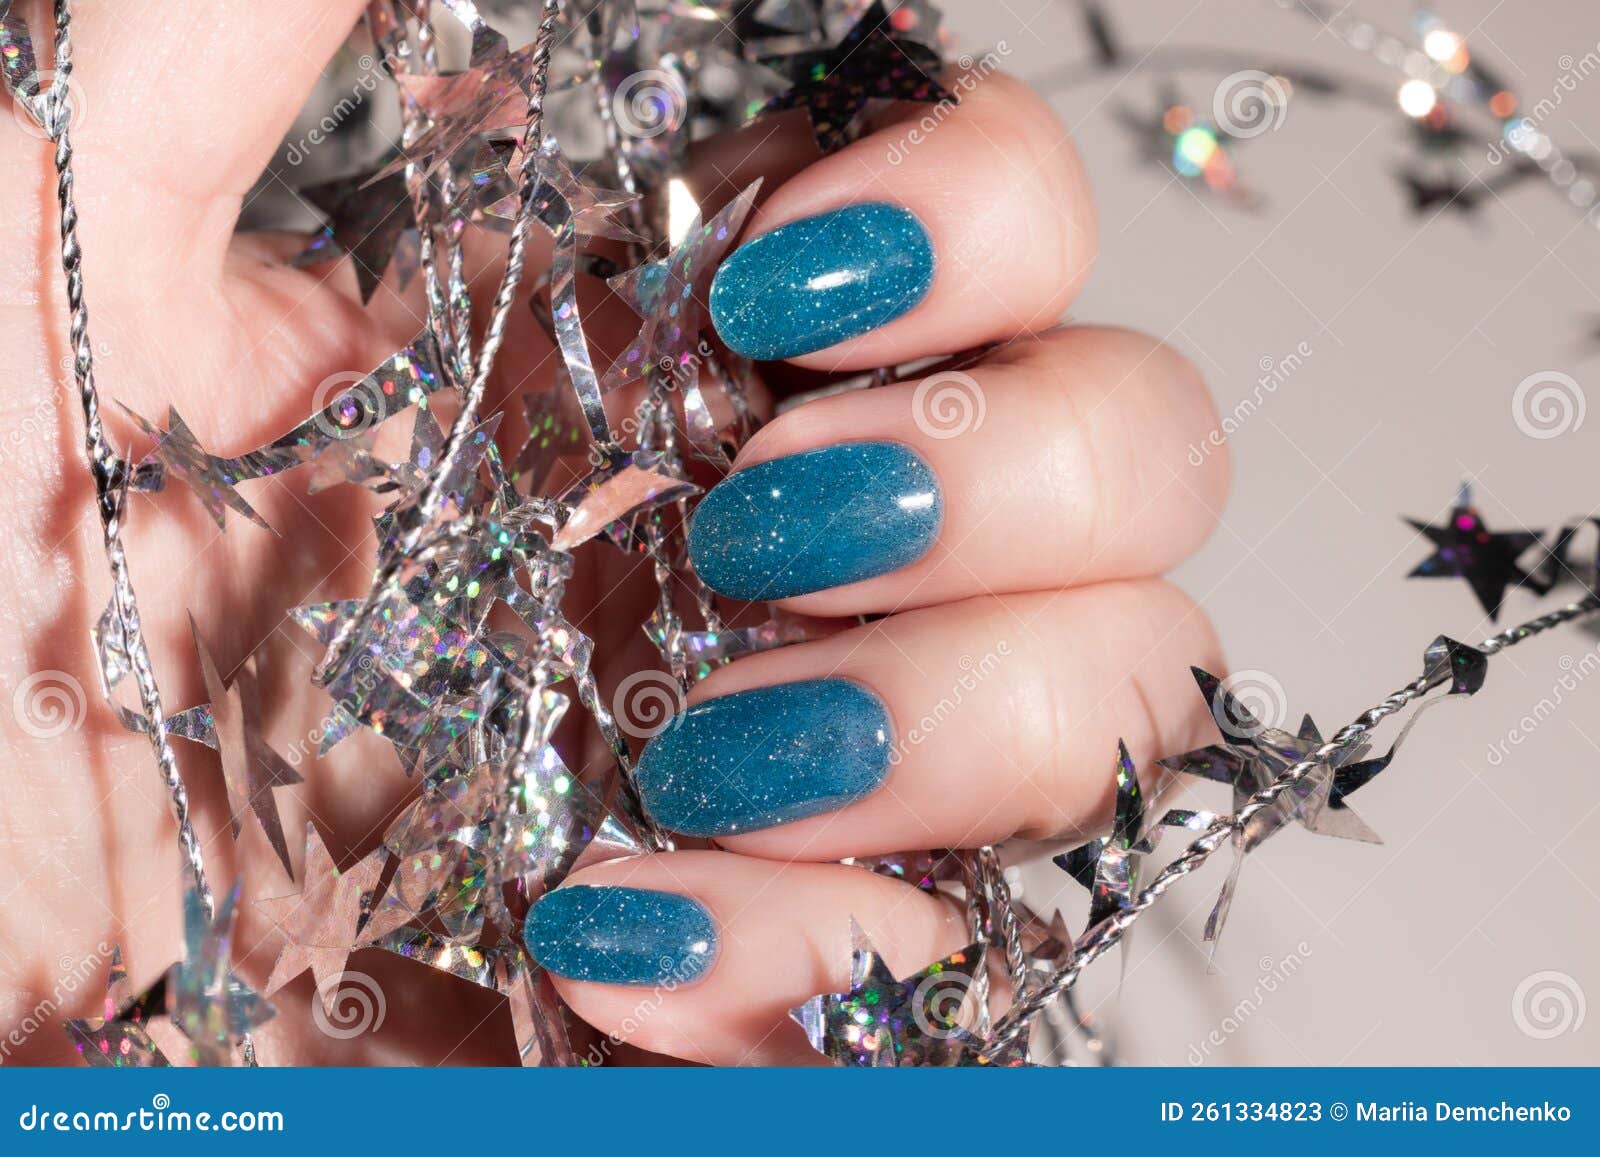 How To Remove Glitter Nail Paint